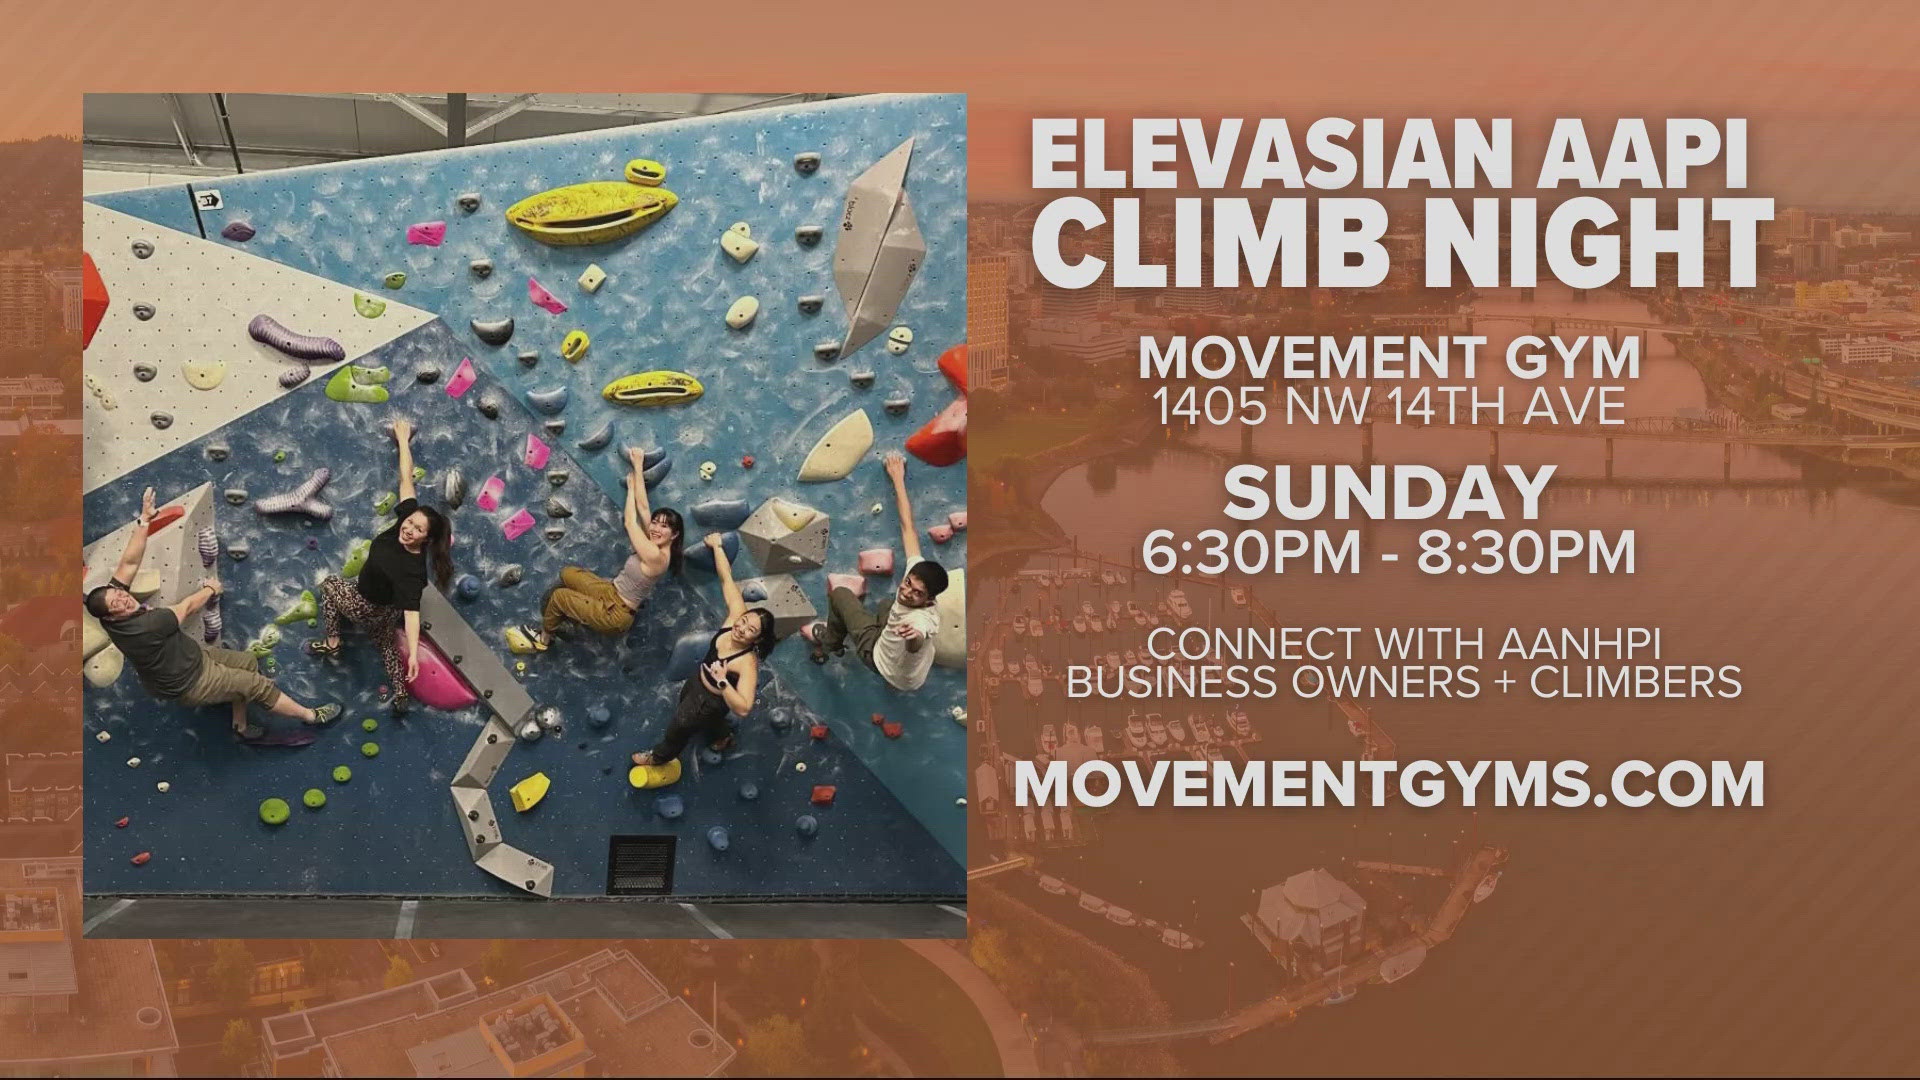 Doctor Carrie Hsia says rock climbing is historically a white, male-dominated sport. That's why she started the event, called "Elevasian," last year.